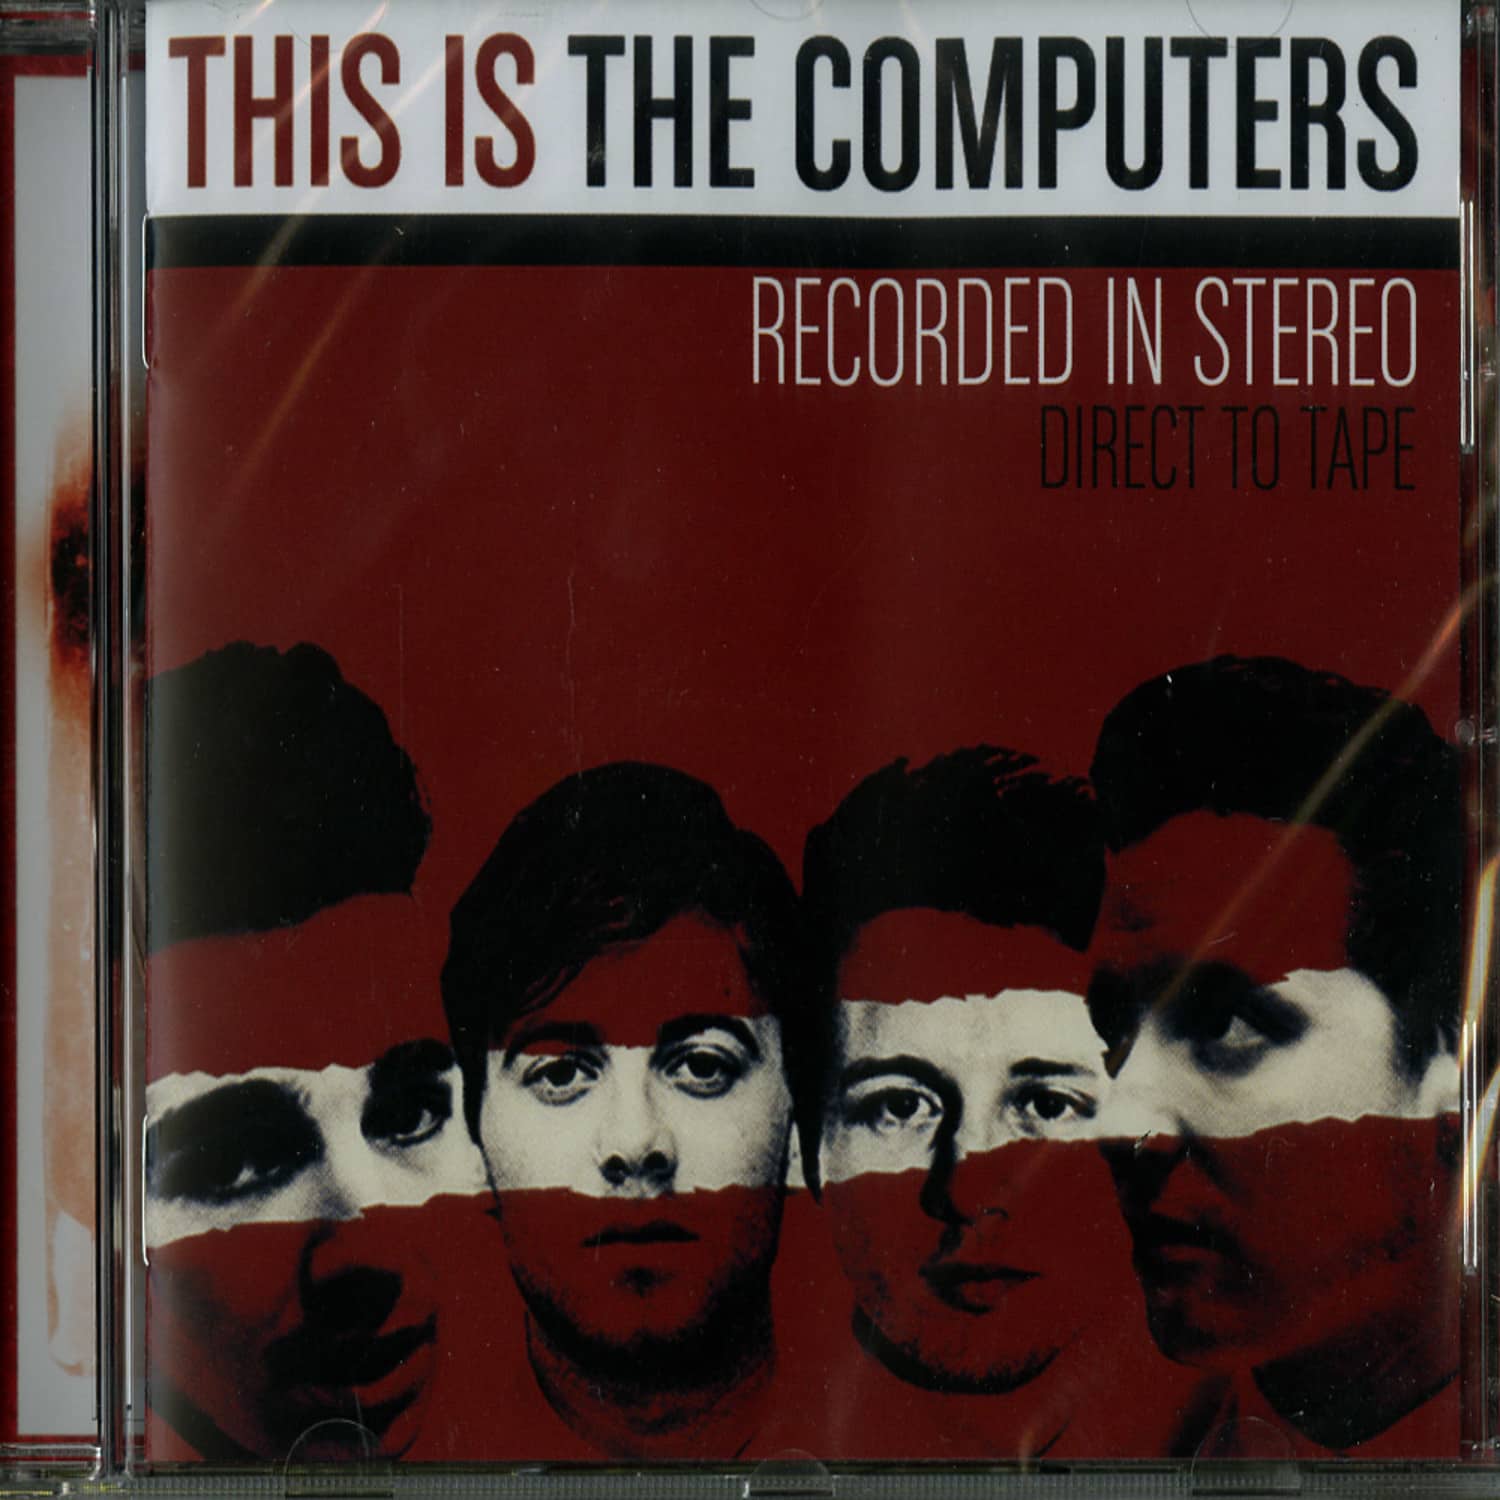 The Computers - THIS IS THE COMPUTERS 